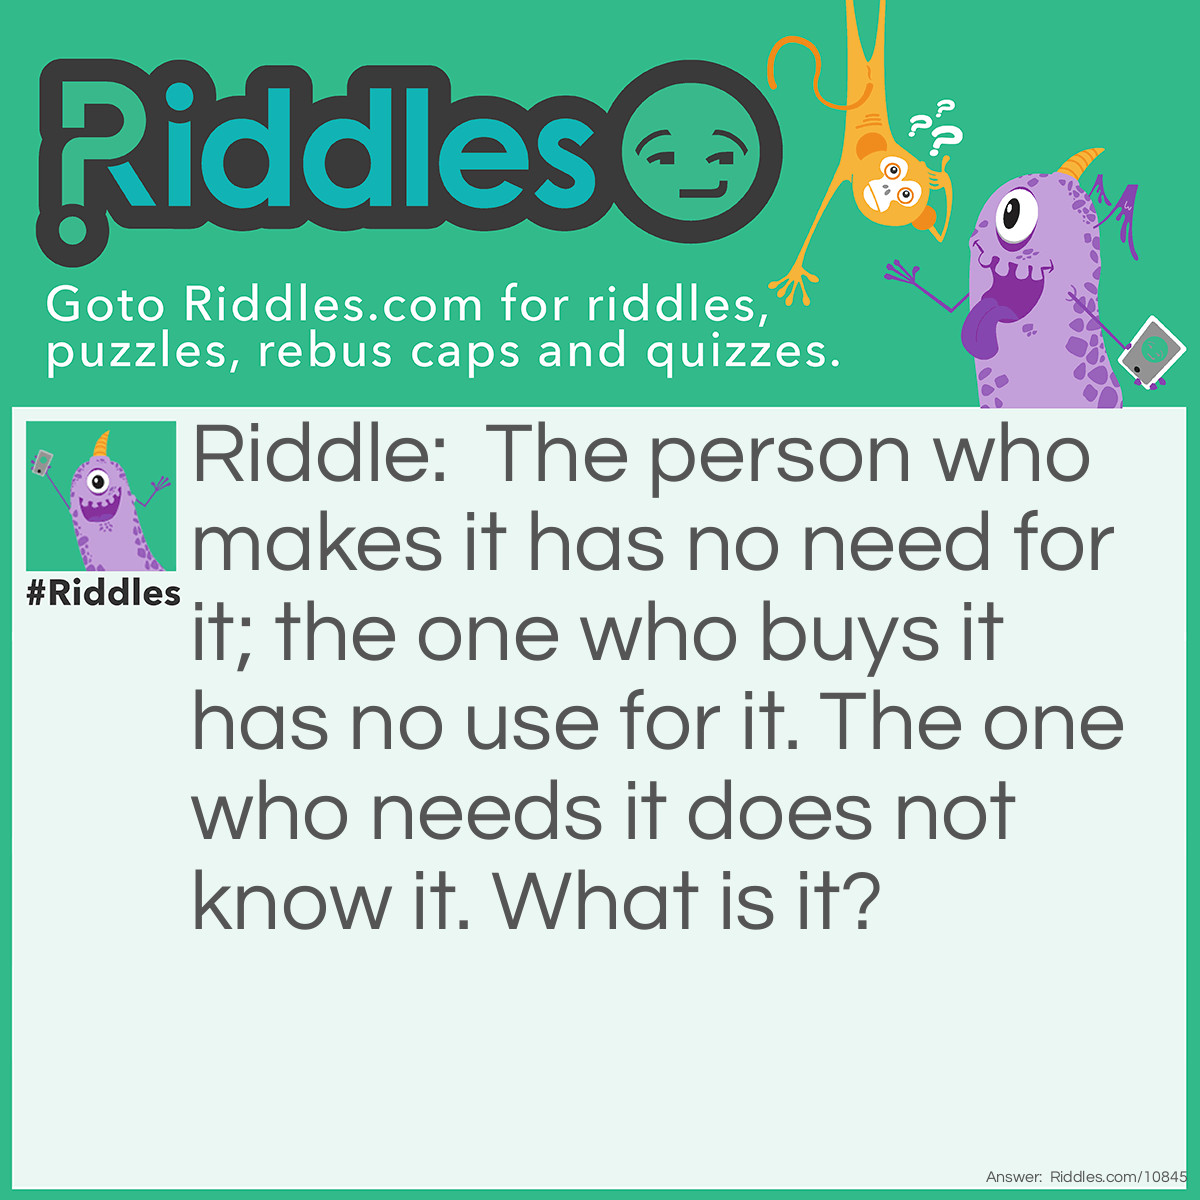 Riddle: The person who makes it has no need for it; the one who buys it has no use for it. The one who needs it does not know it. What is it? Answer: The coffin.